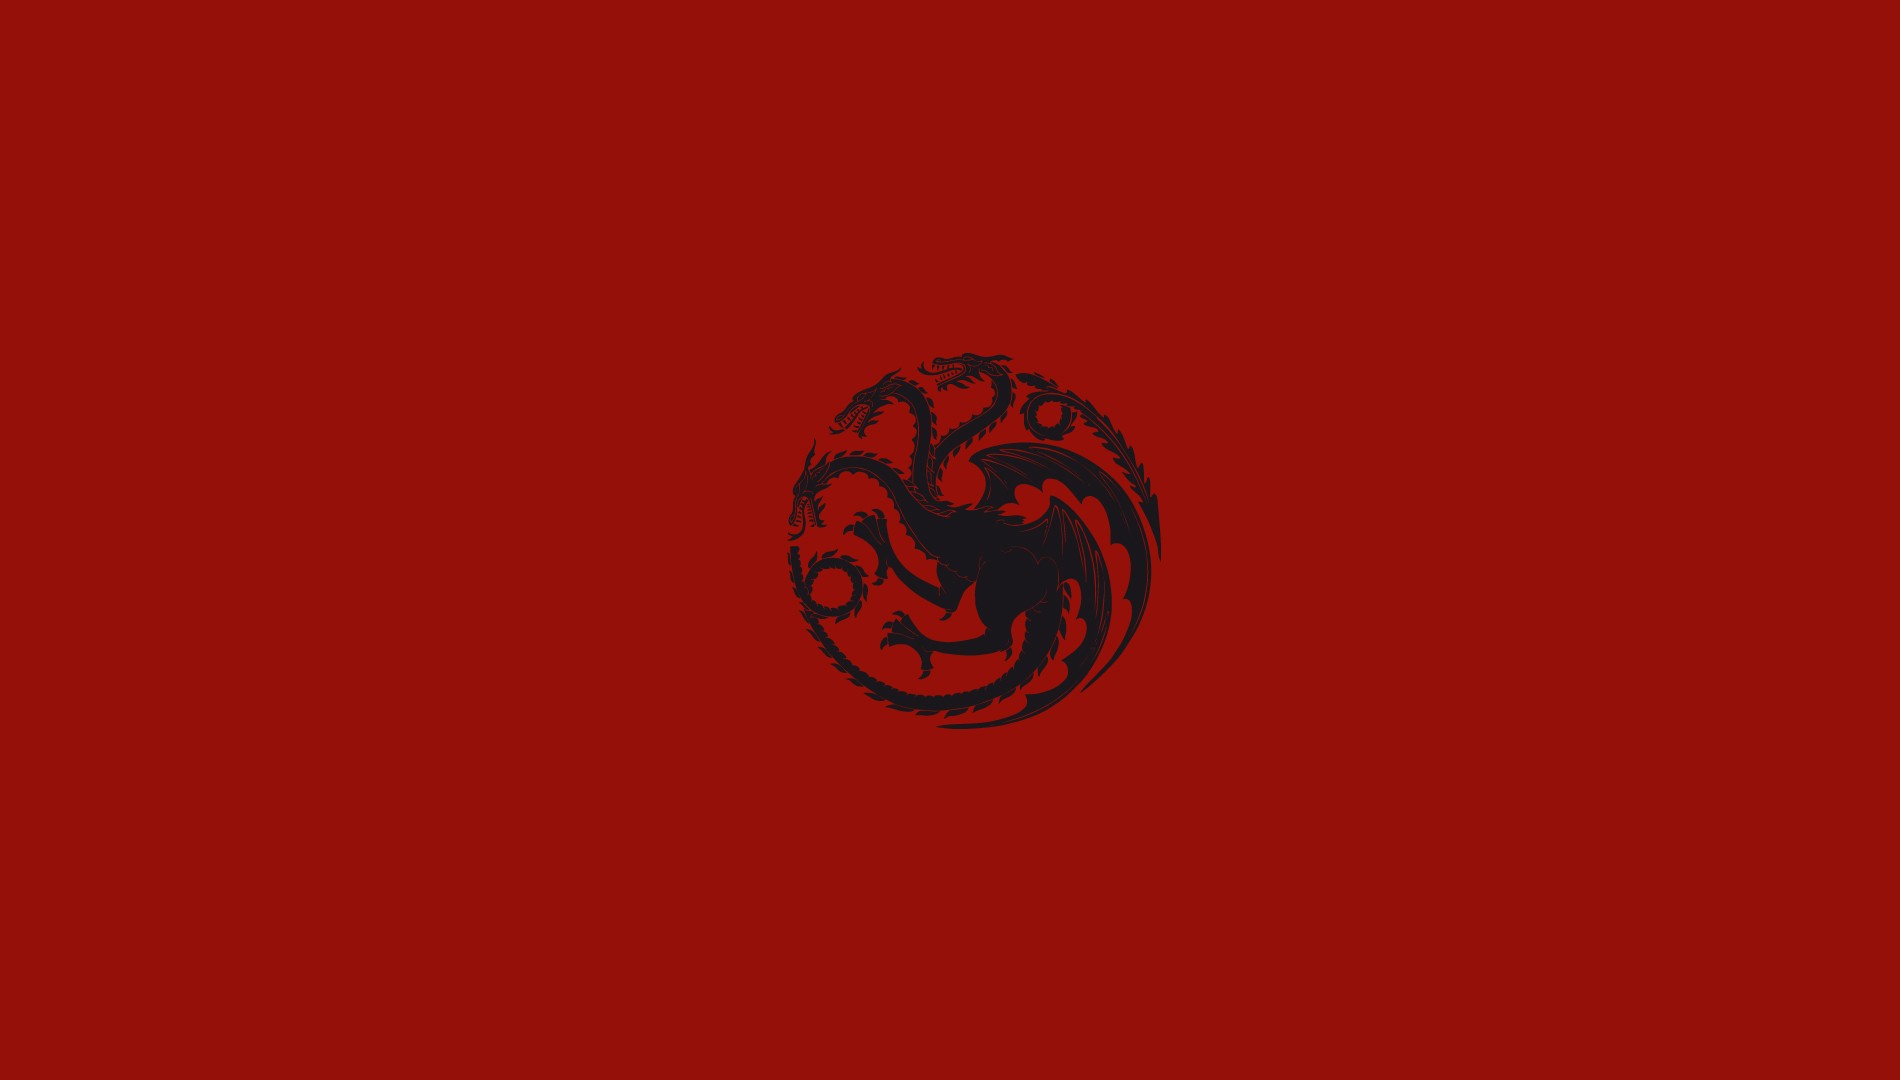 Game Of Thrones: A Telltale Games Series, Game Of Thrones, Simple, Simple Background Wallpaper